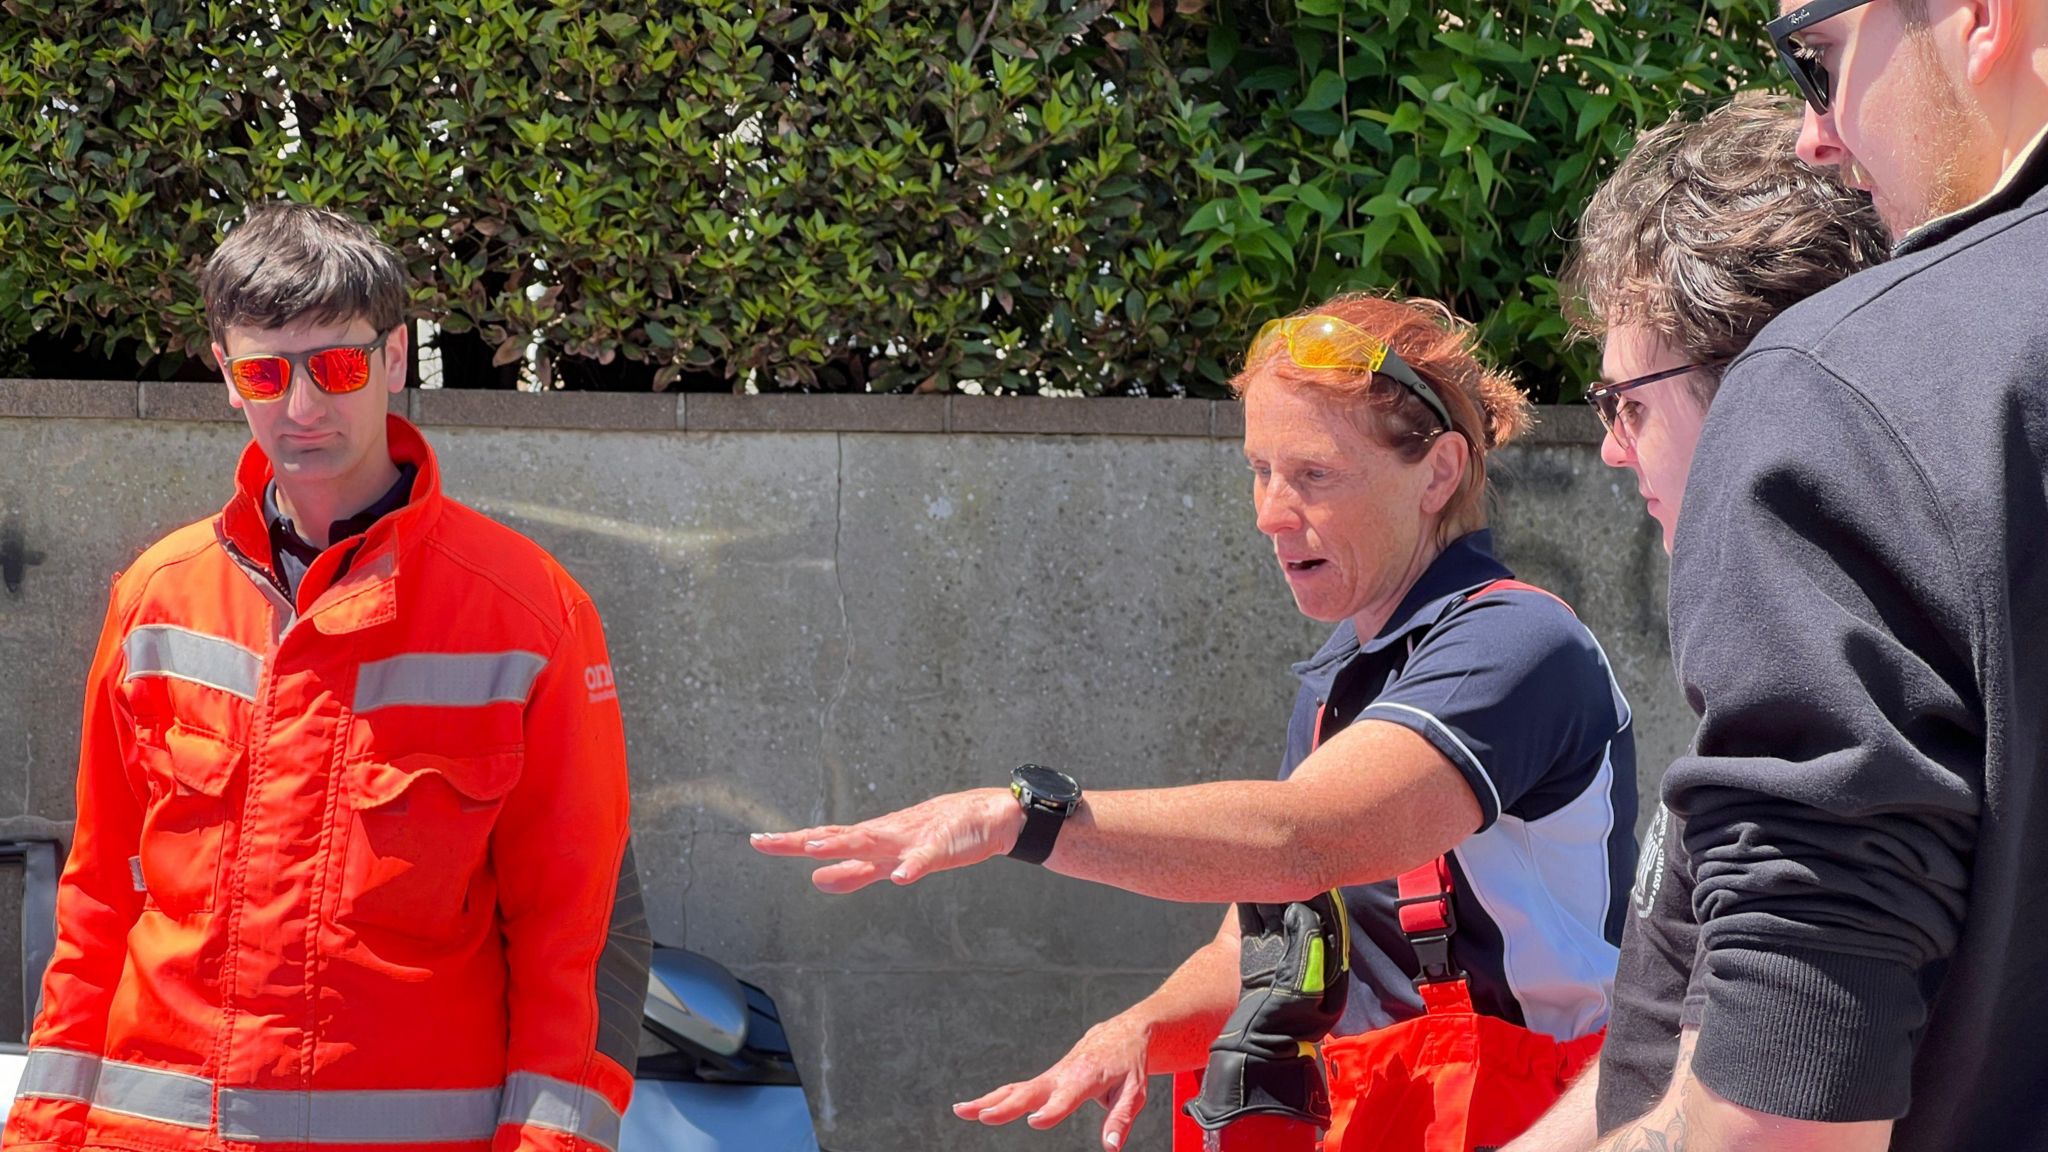 Helen is gesturing to the ground as two men stand next to her watching what she says and another member of Normandy Rescue is to her left in full high vis overalls